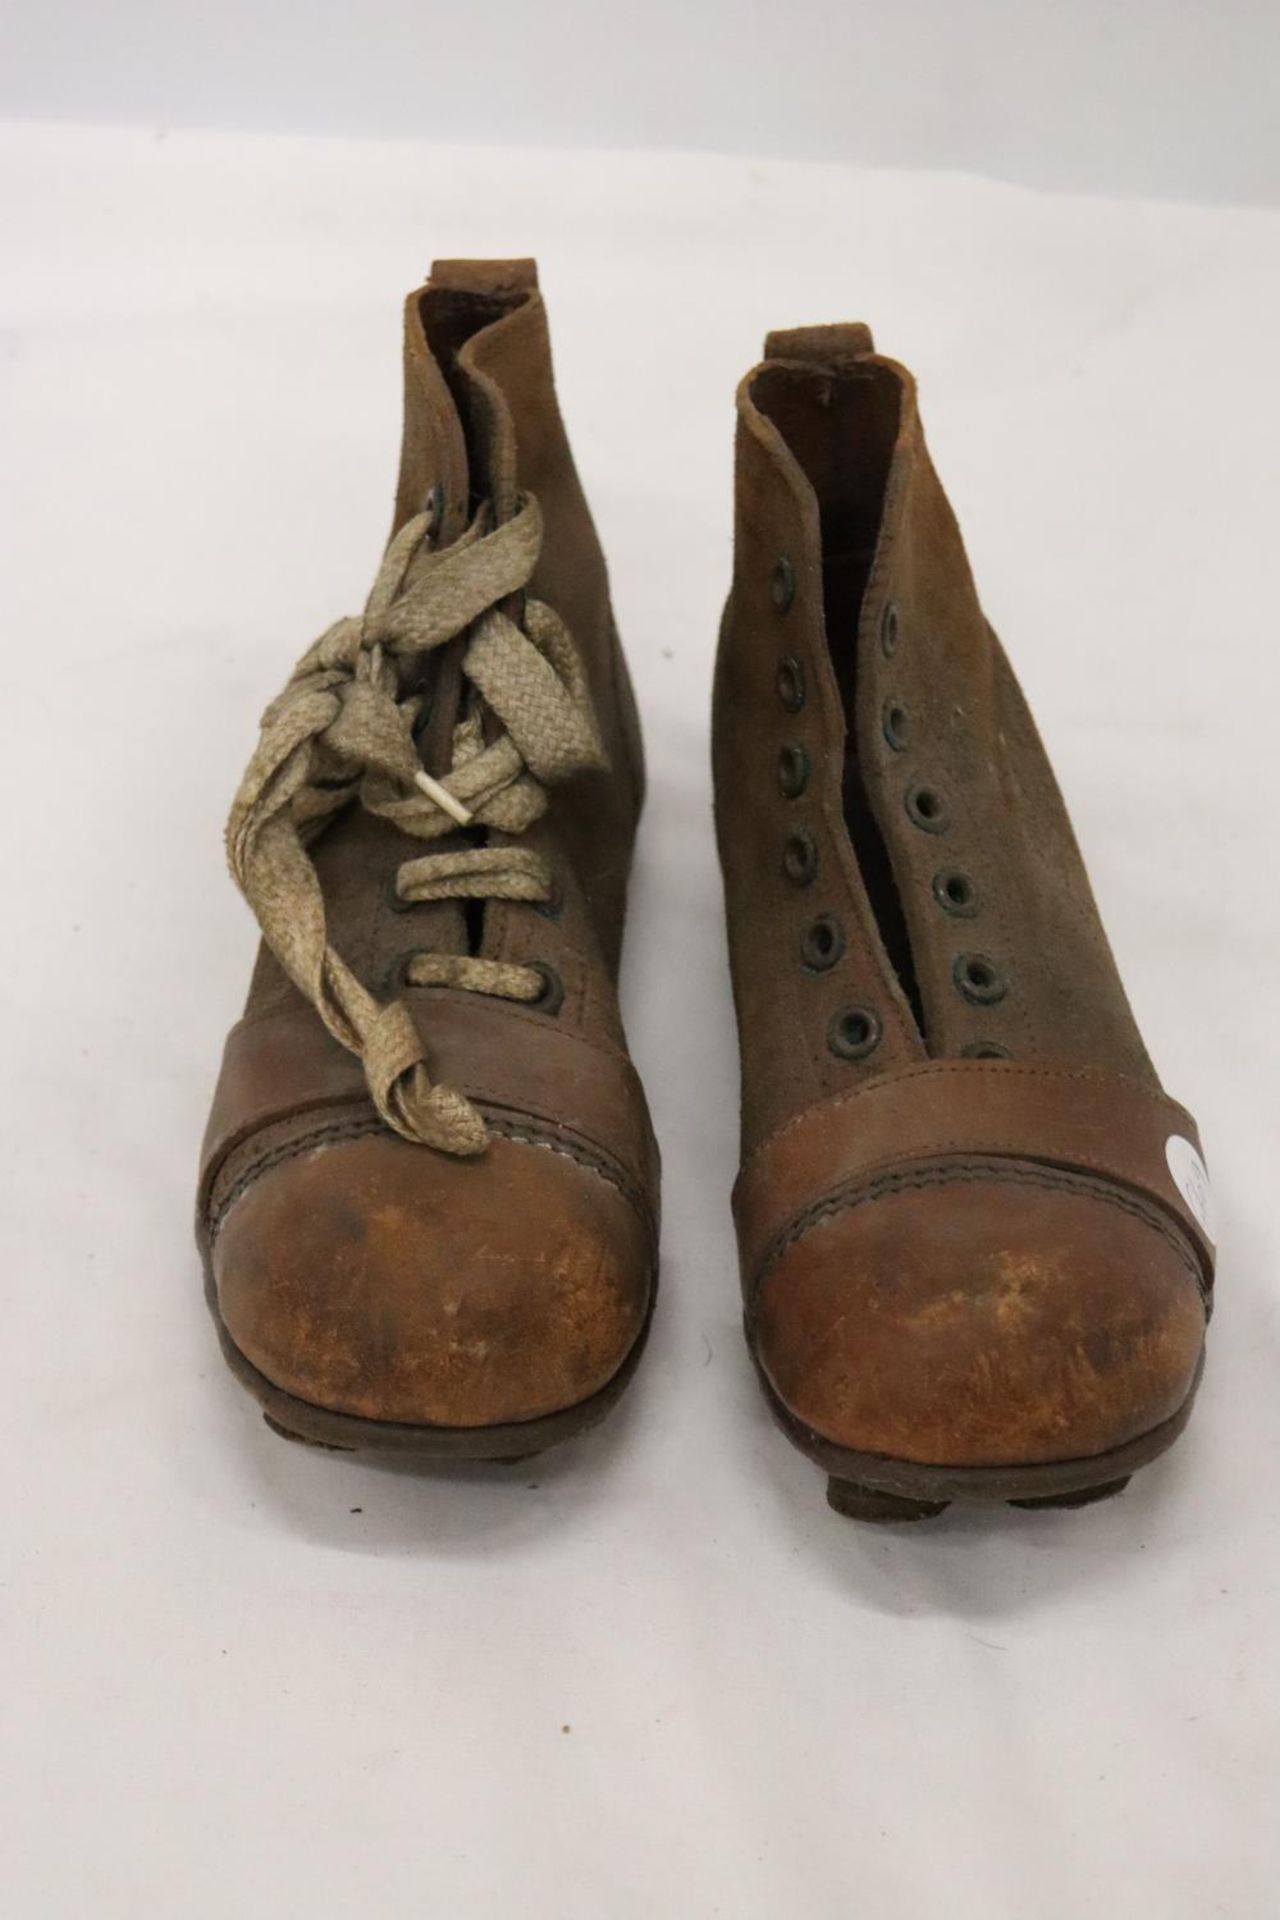 A PAIR OF VINTAGE FOOTBALL BOOTS - Image 4 of 4